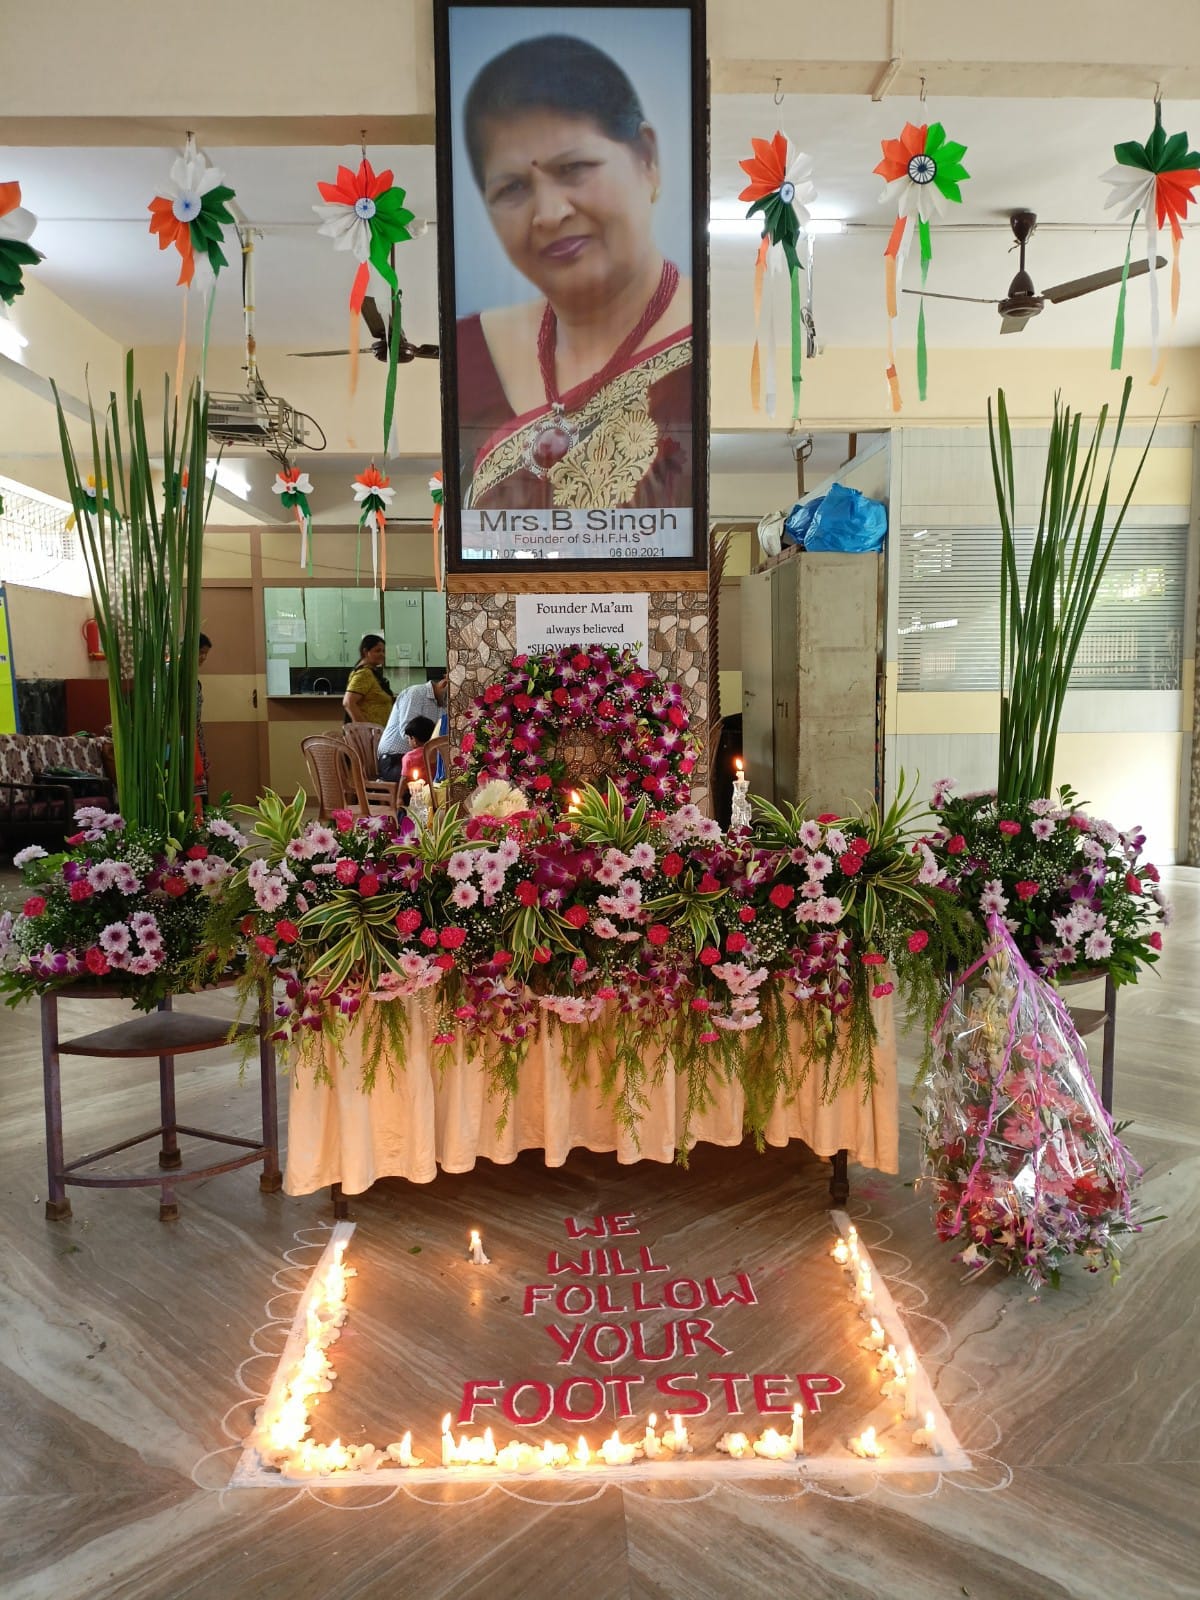 REMEMBERING Mrs B SINGH  THE FOUNDER OF SAI HOLY FAITH HIGH SCHOOL